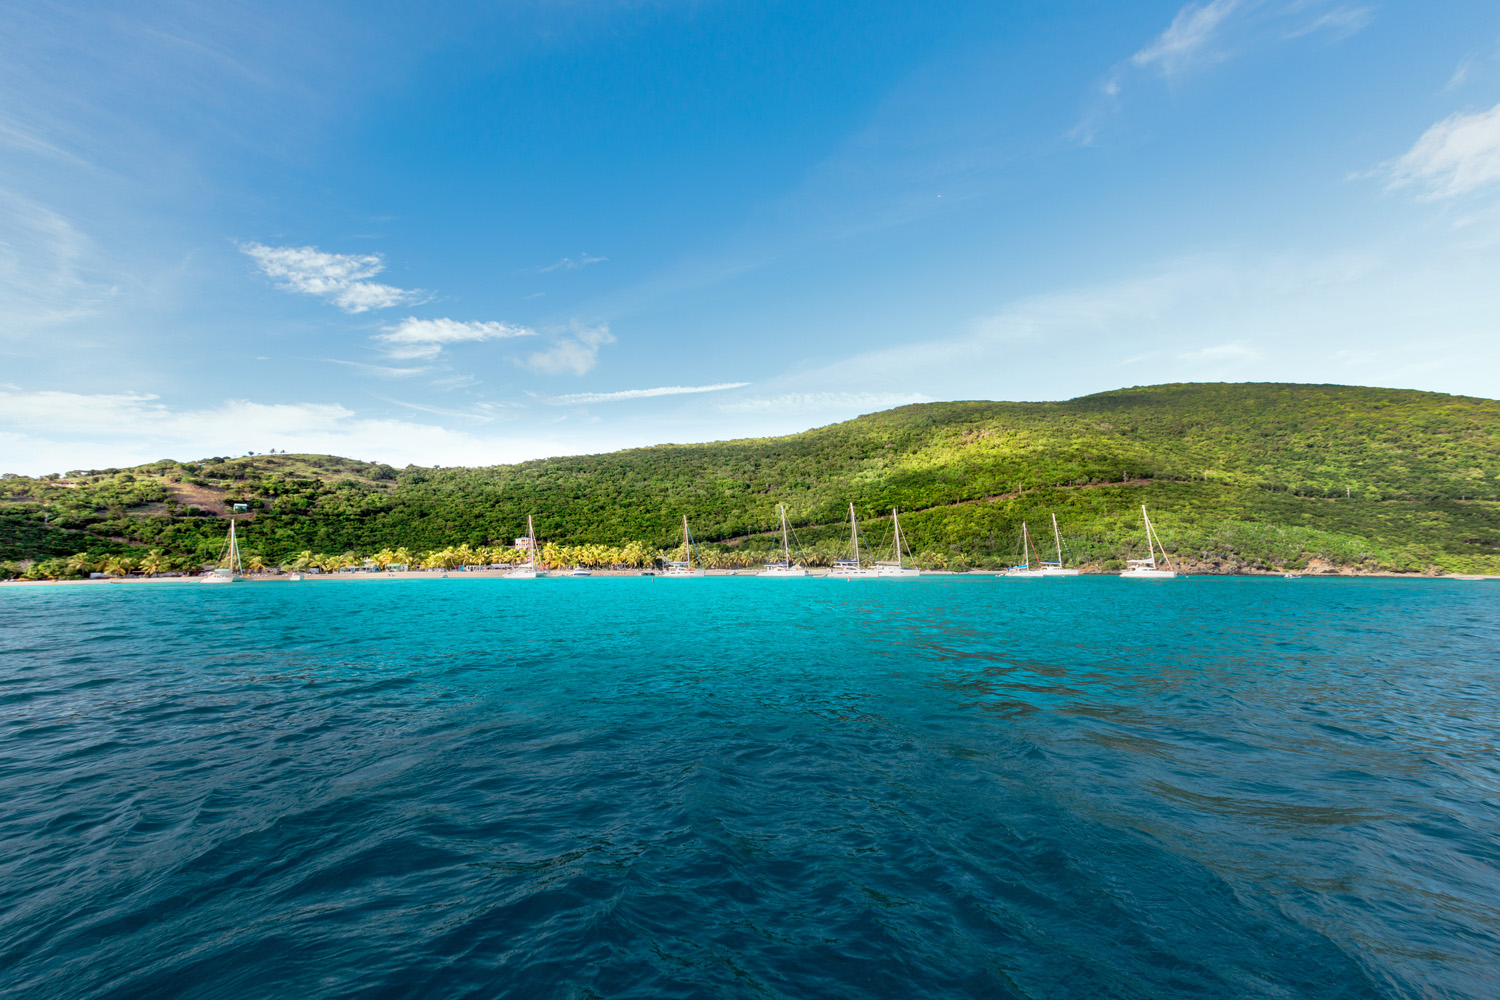 The annual Sweethearts of the Caribbean and Classic Yacht Regatta will return to the British Virgin Islands this February. (Photo credit: The British Virgin Islands Tourist Board)